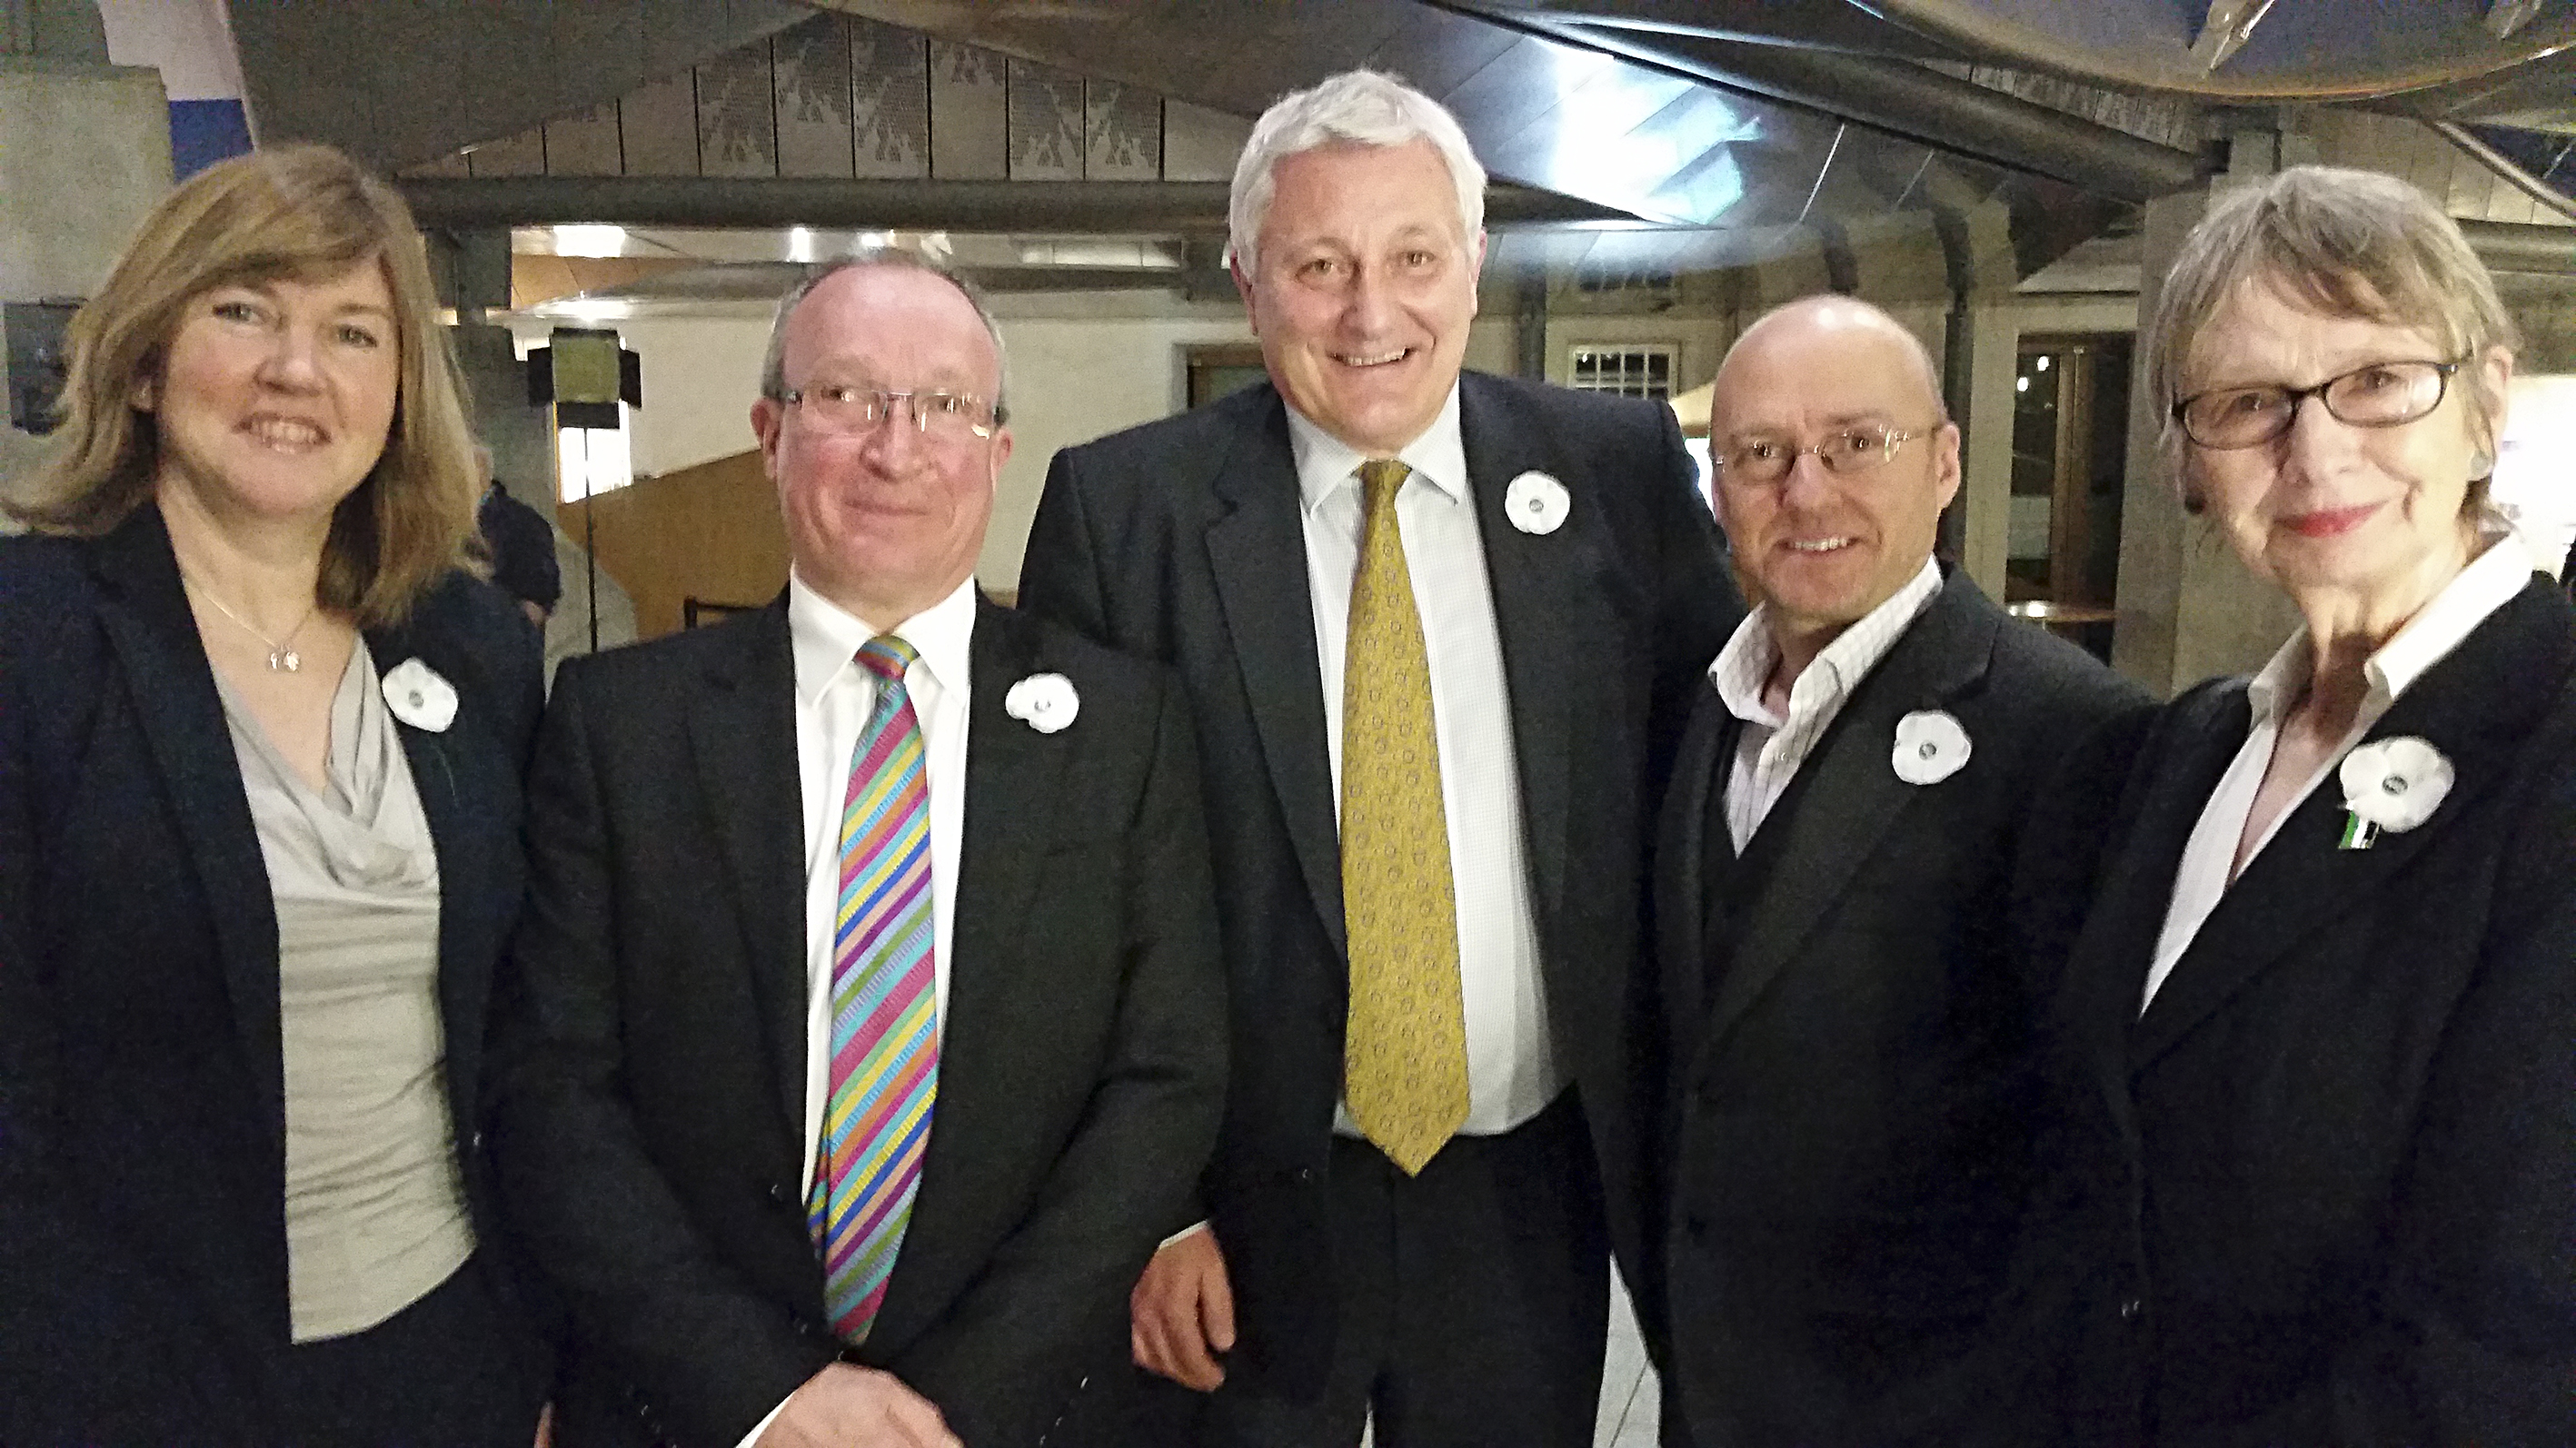 5 msps wearing white peace poppies